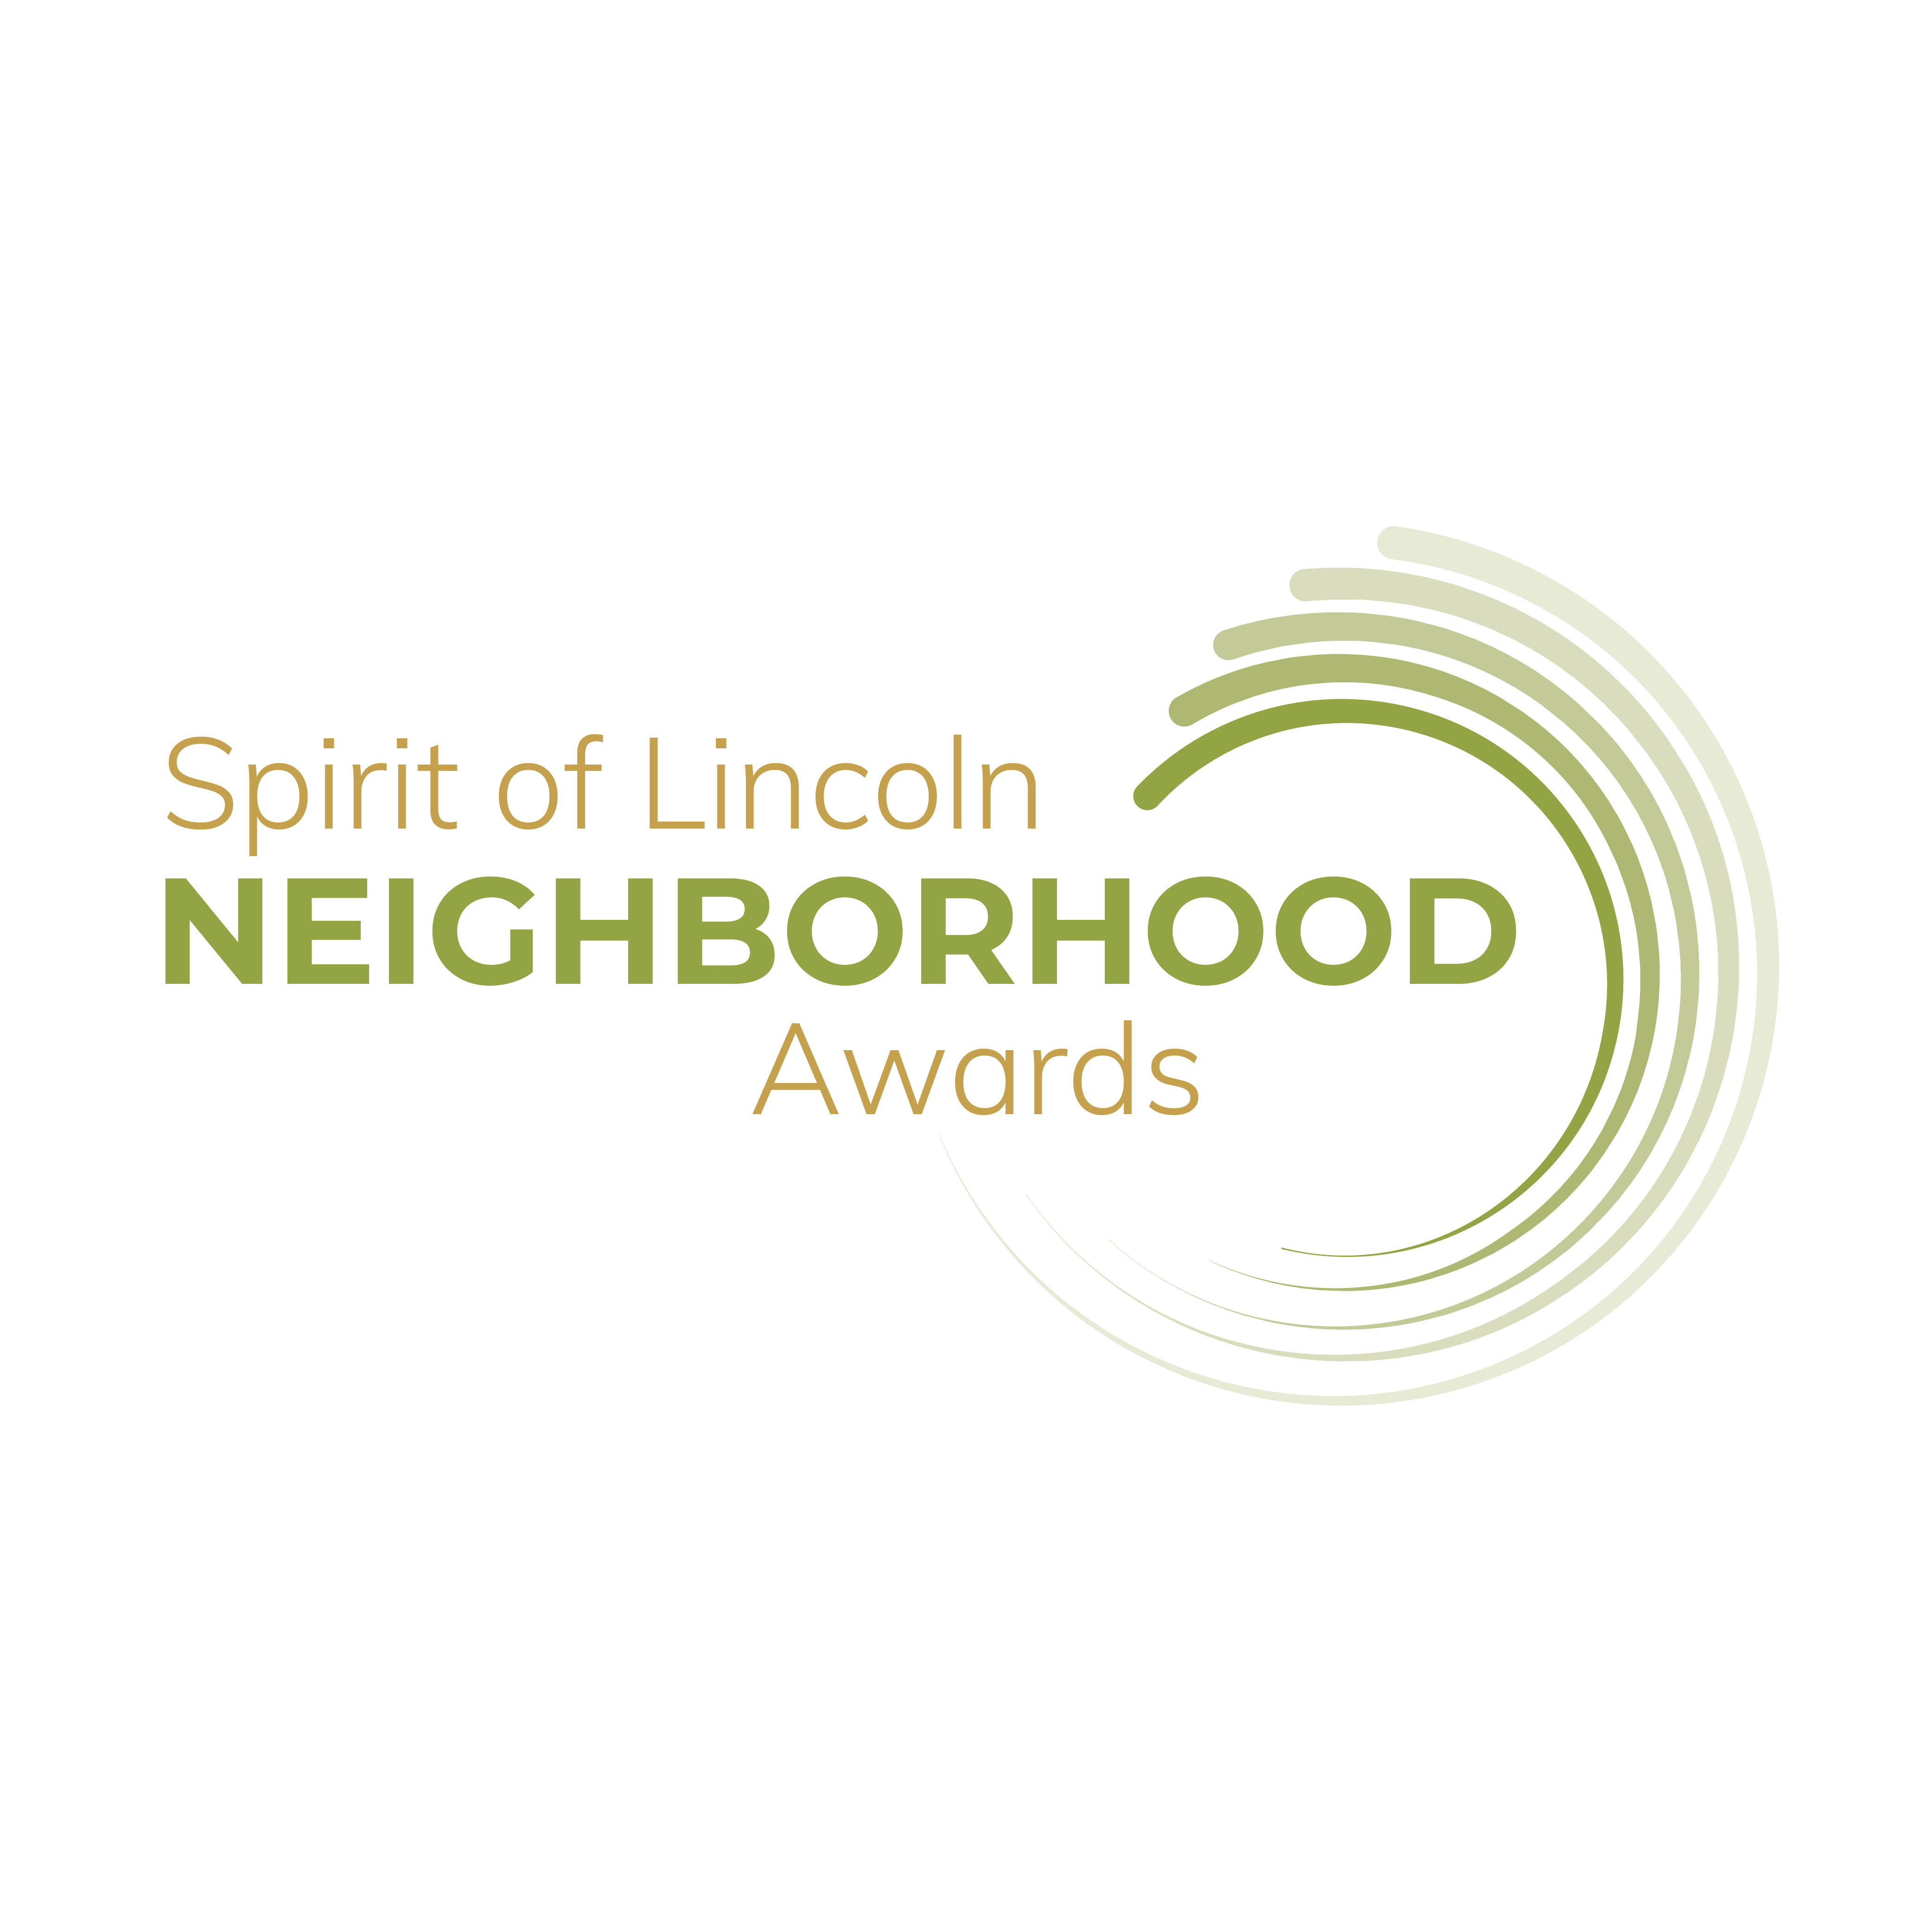 The image is the logo for the Spirit of Lincoln Neighborhood Awards. It has six half circles radiating out of it in gradients of green. 